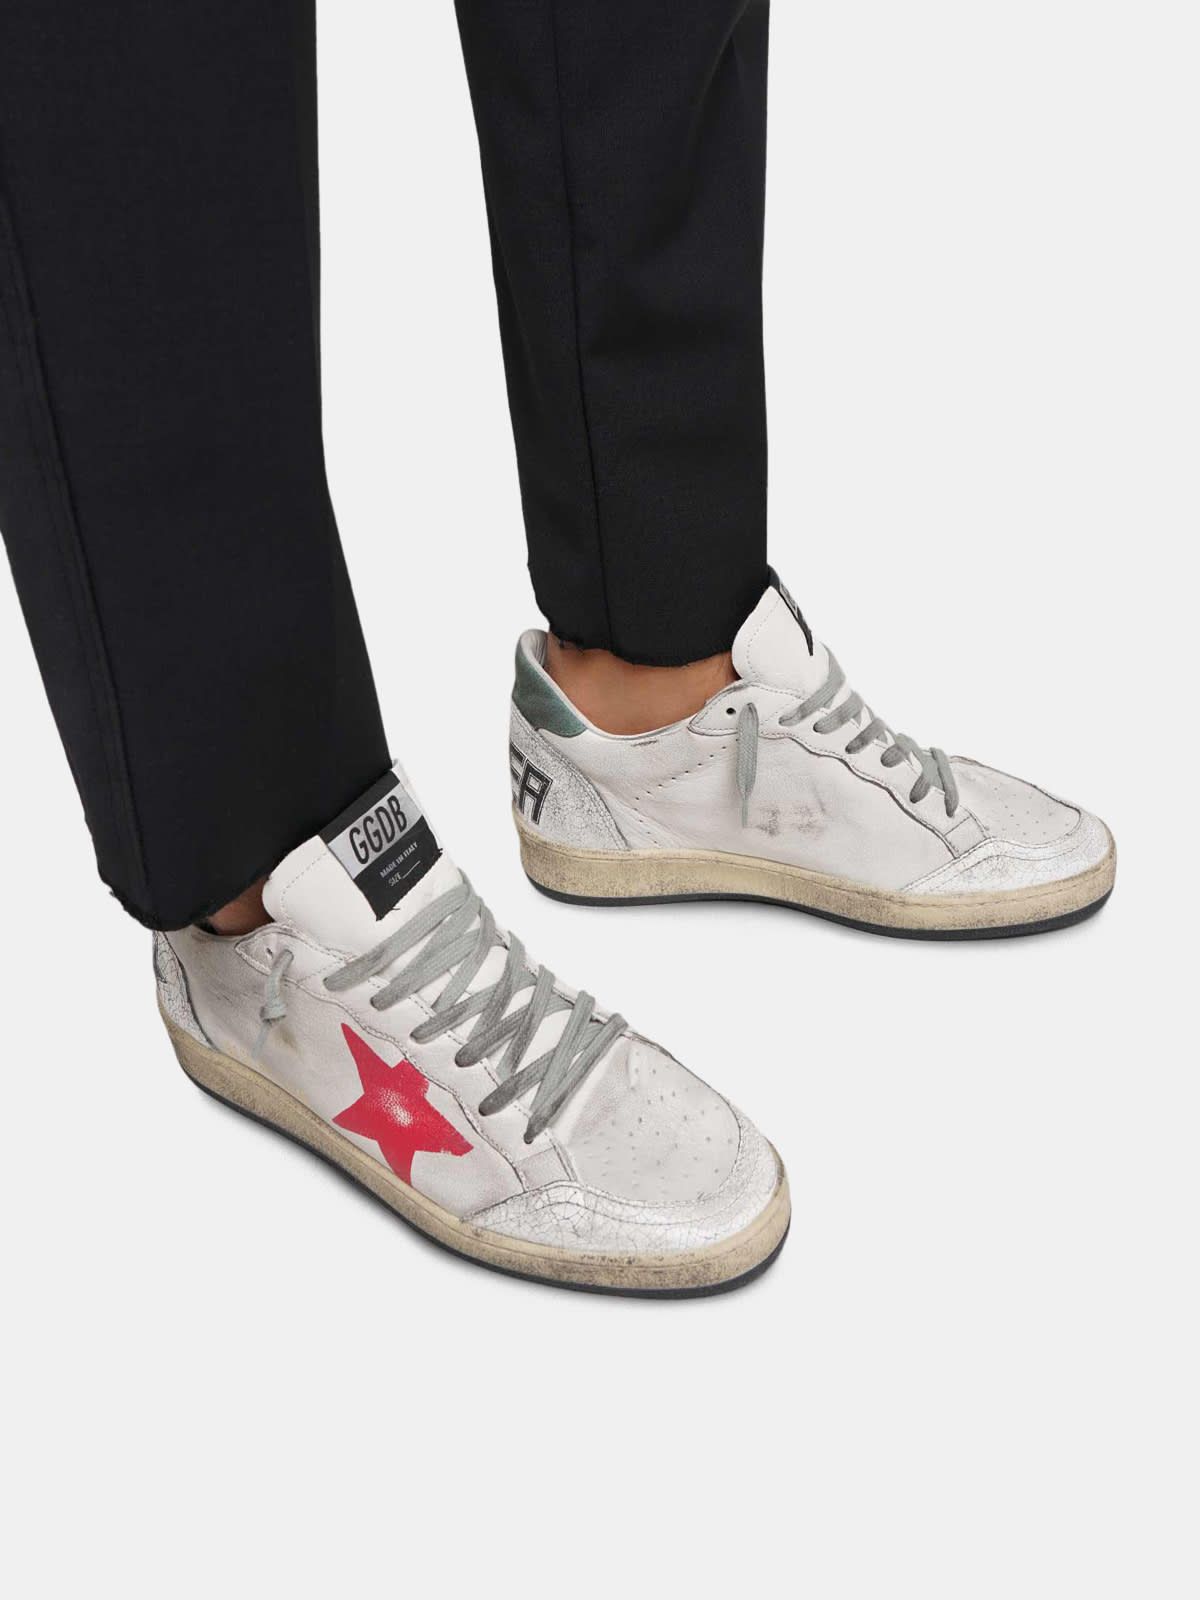 Ball Star sneakers in crackle leather with hand-painted red star